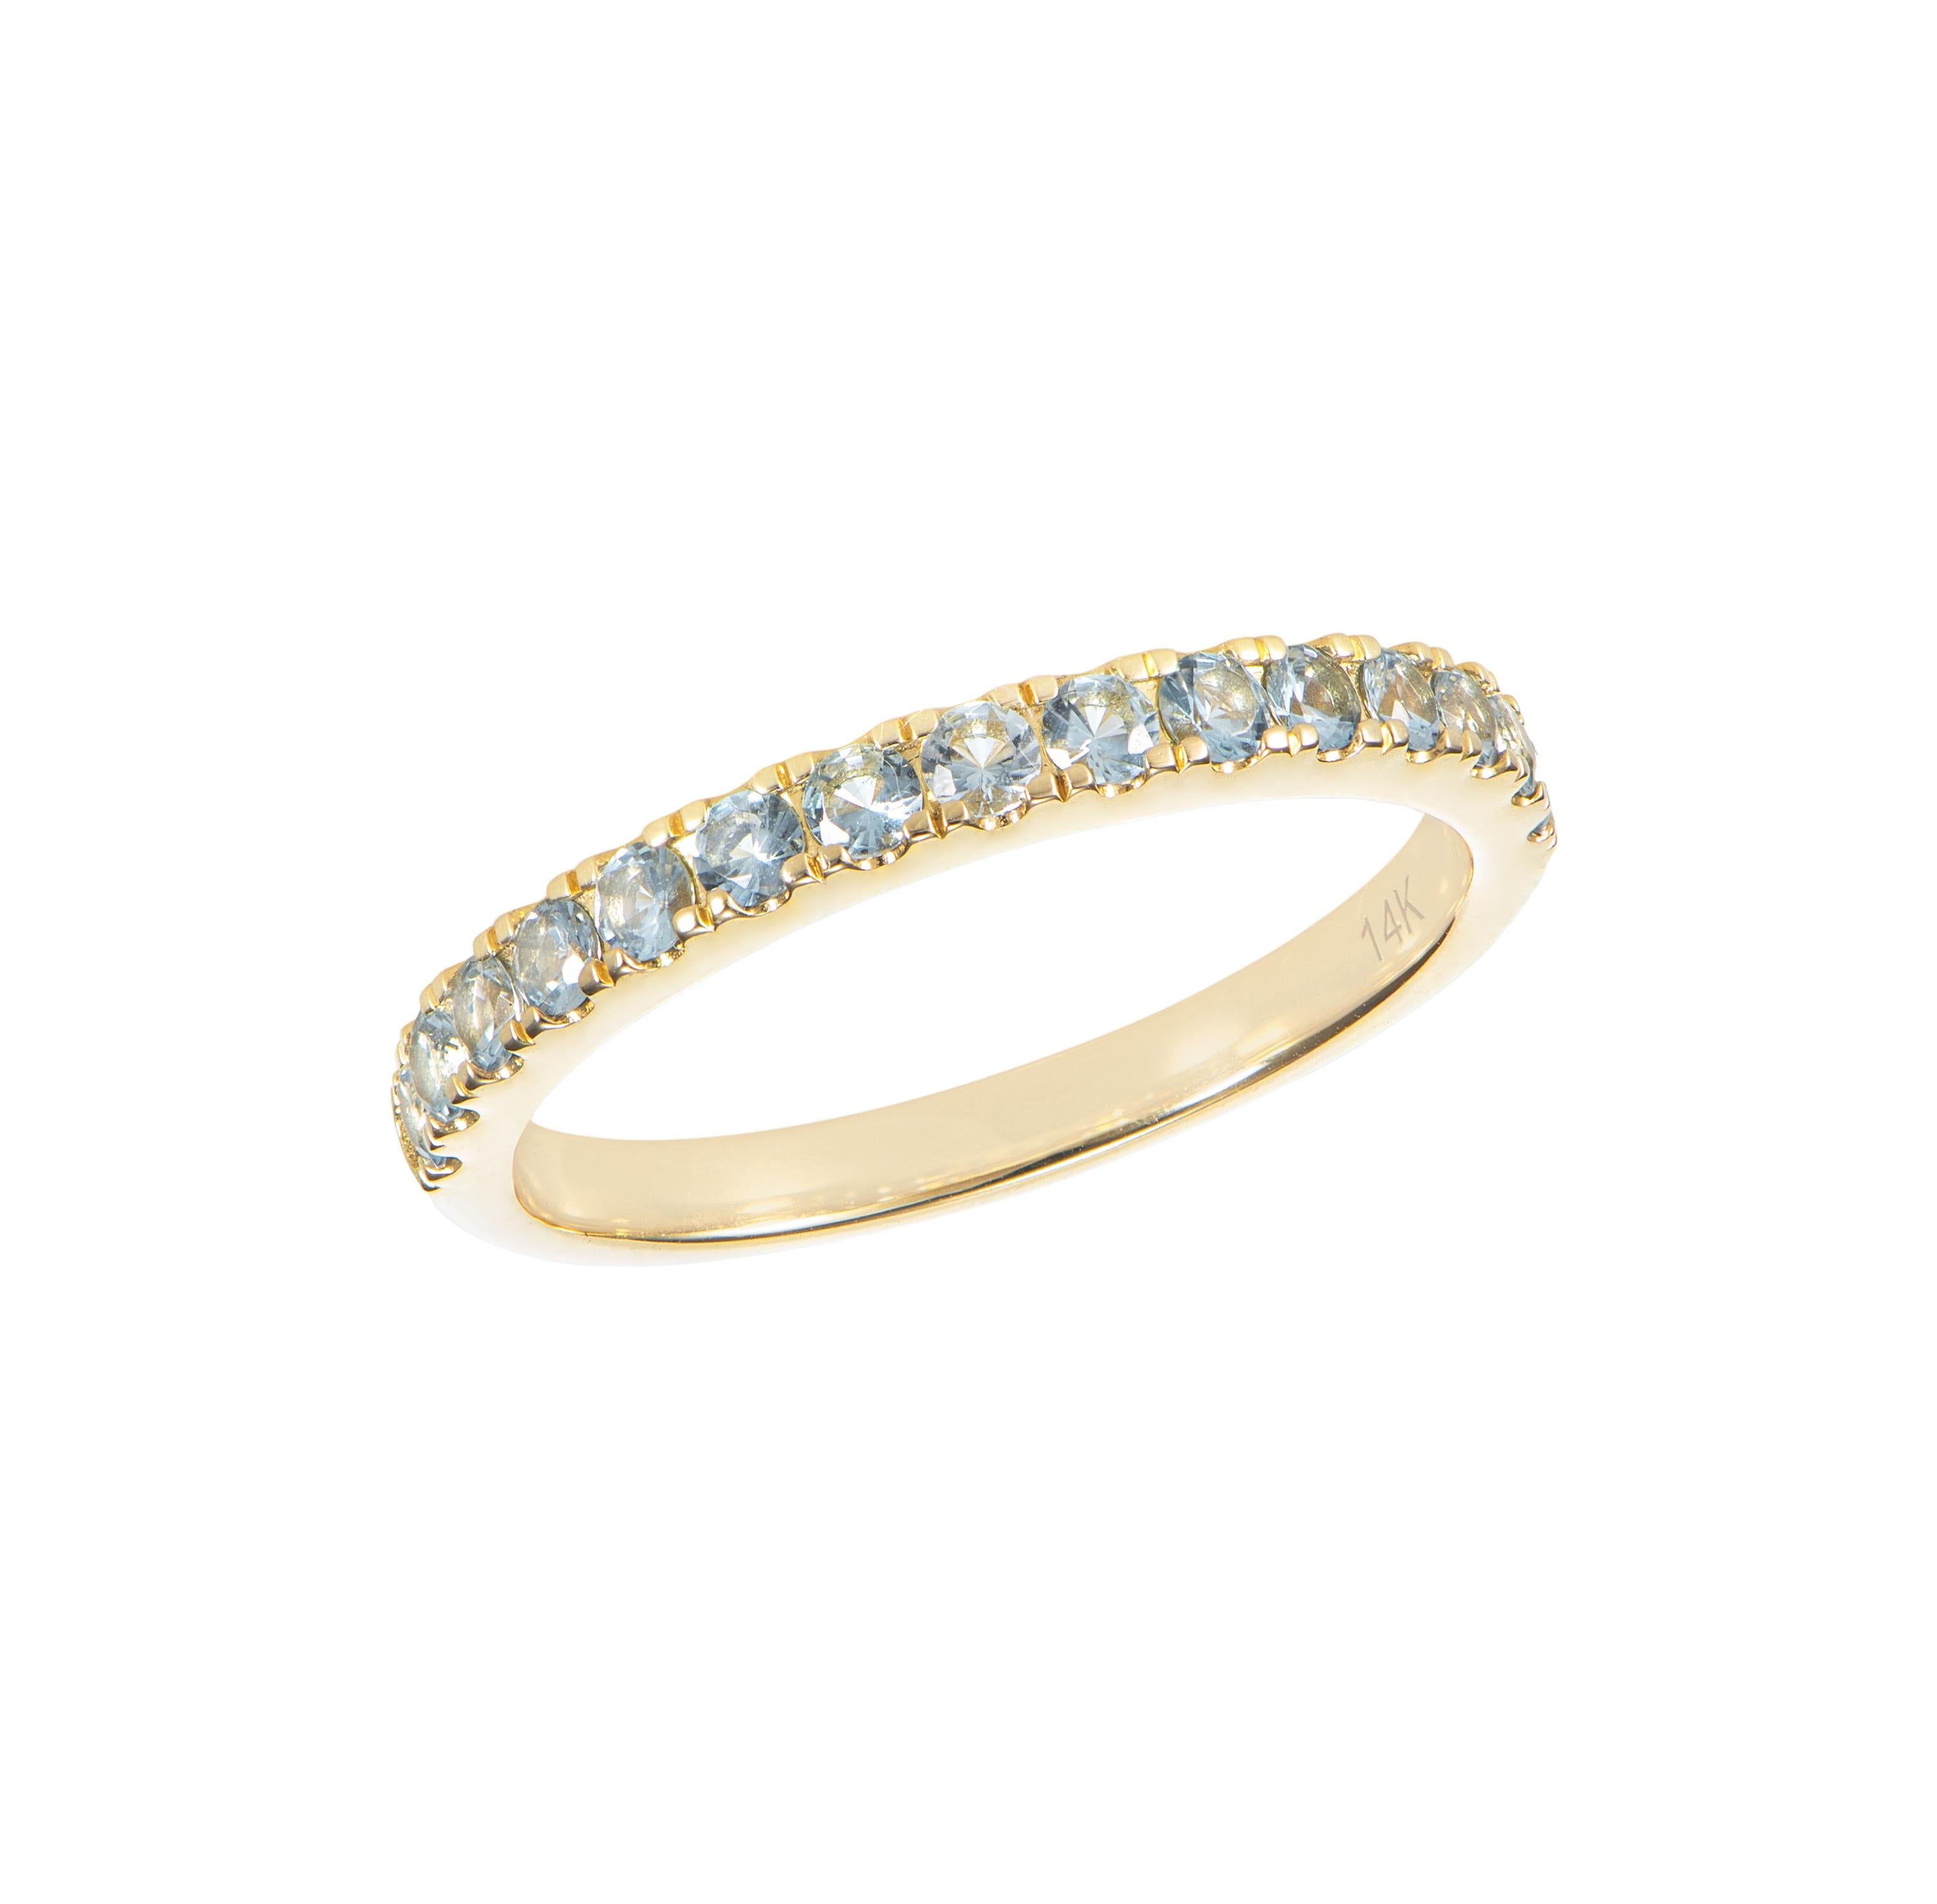 Contemporary 0.61 Carat Sky Blue Topaz Eternity Ring in 14Karat Yellow Gold. For Sale